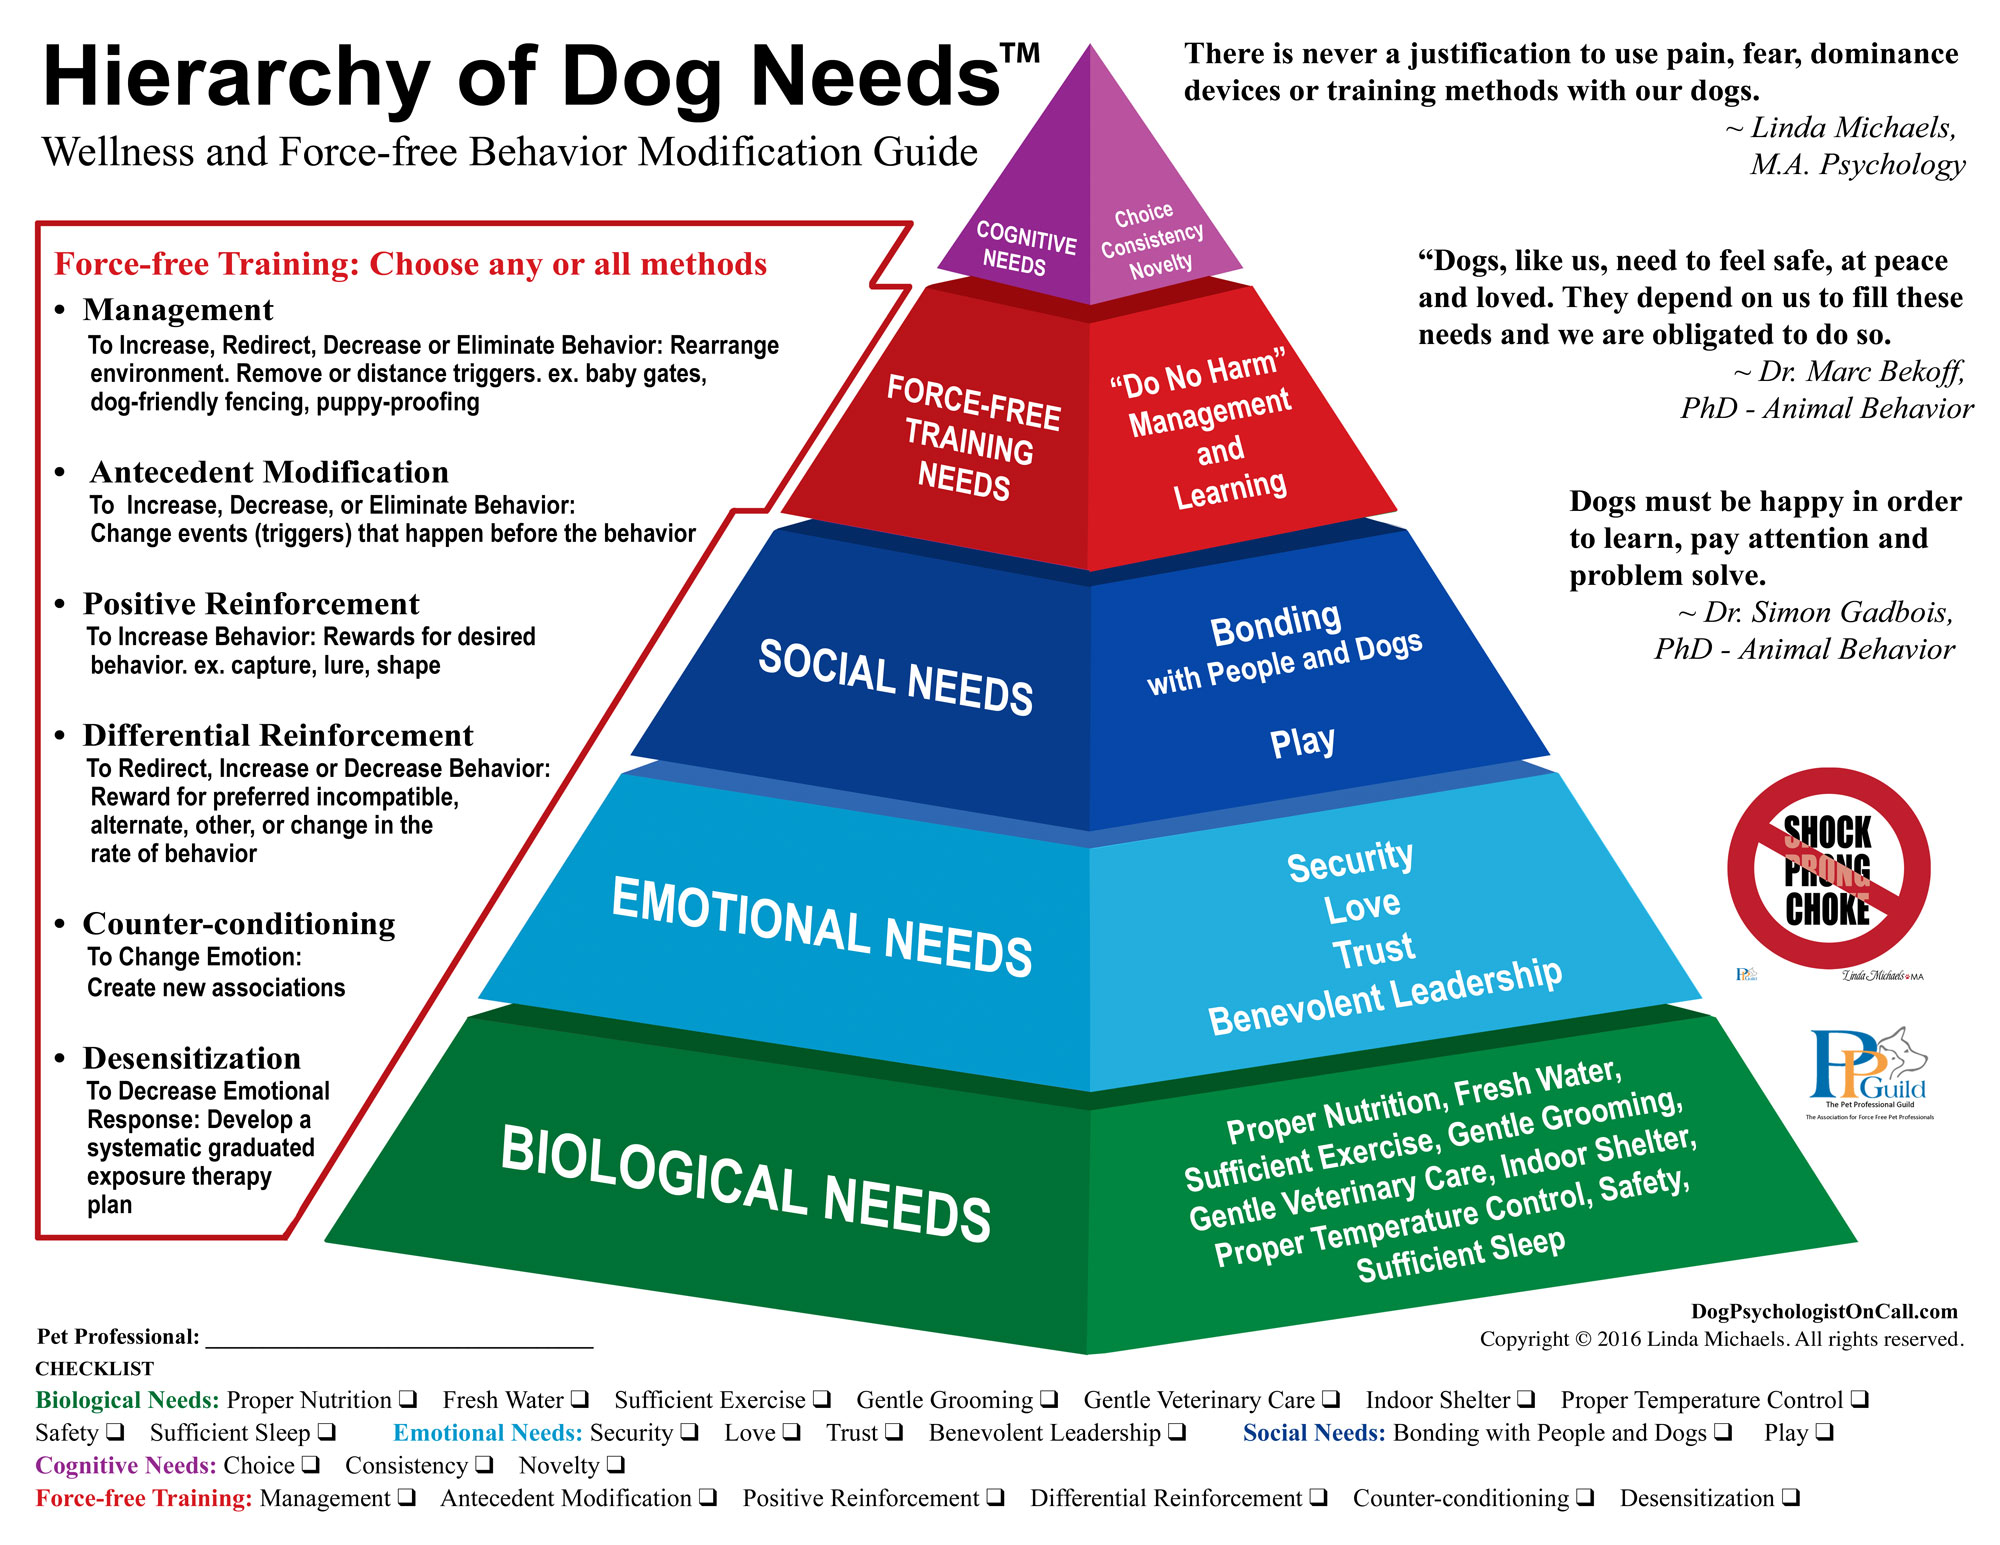 Hierarchy of Dog Needs Chat on Positive Pet Advice.   Linda Michaels, M.A., — Del Mar Dog Training